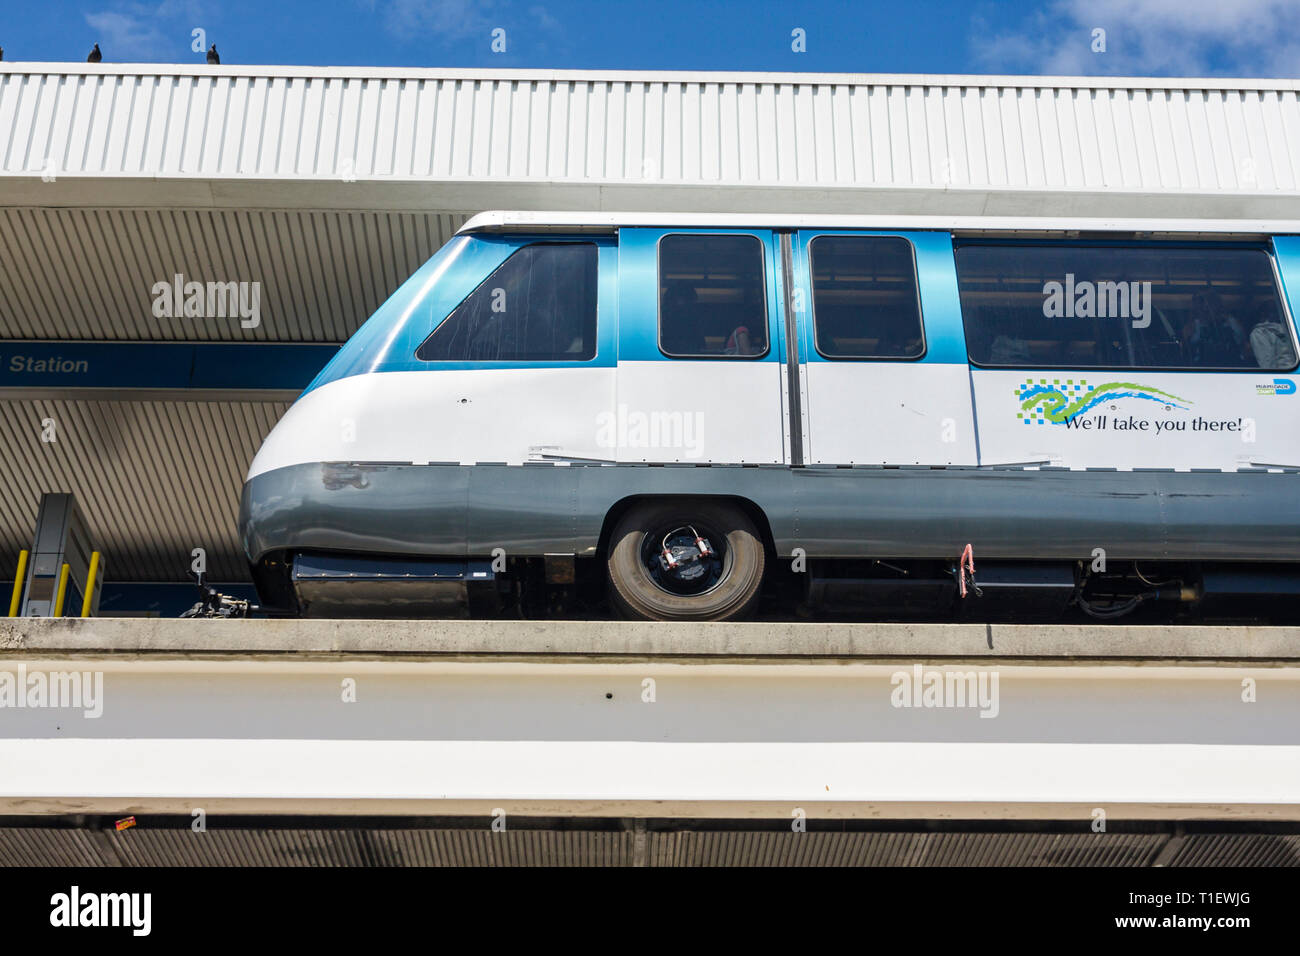 Miami Florida,Omni Station,Metromover,APM,Automated People mover,mass Transit,Elevated track,train,cart,basket,trolley,Bombardier CX 100 Vehicle,FL090 Foto Stock